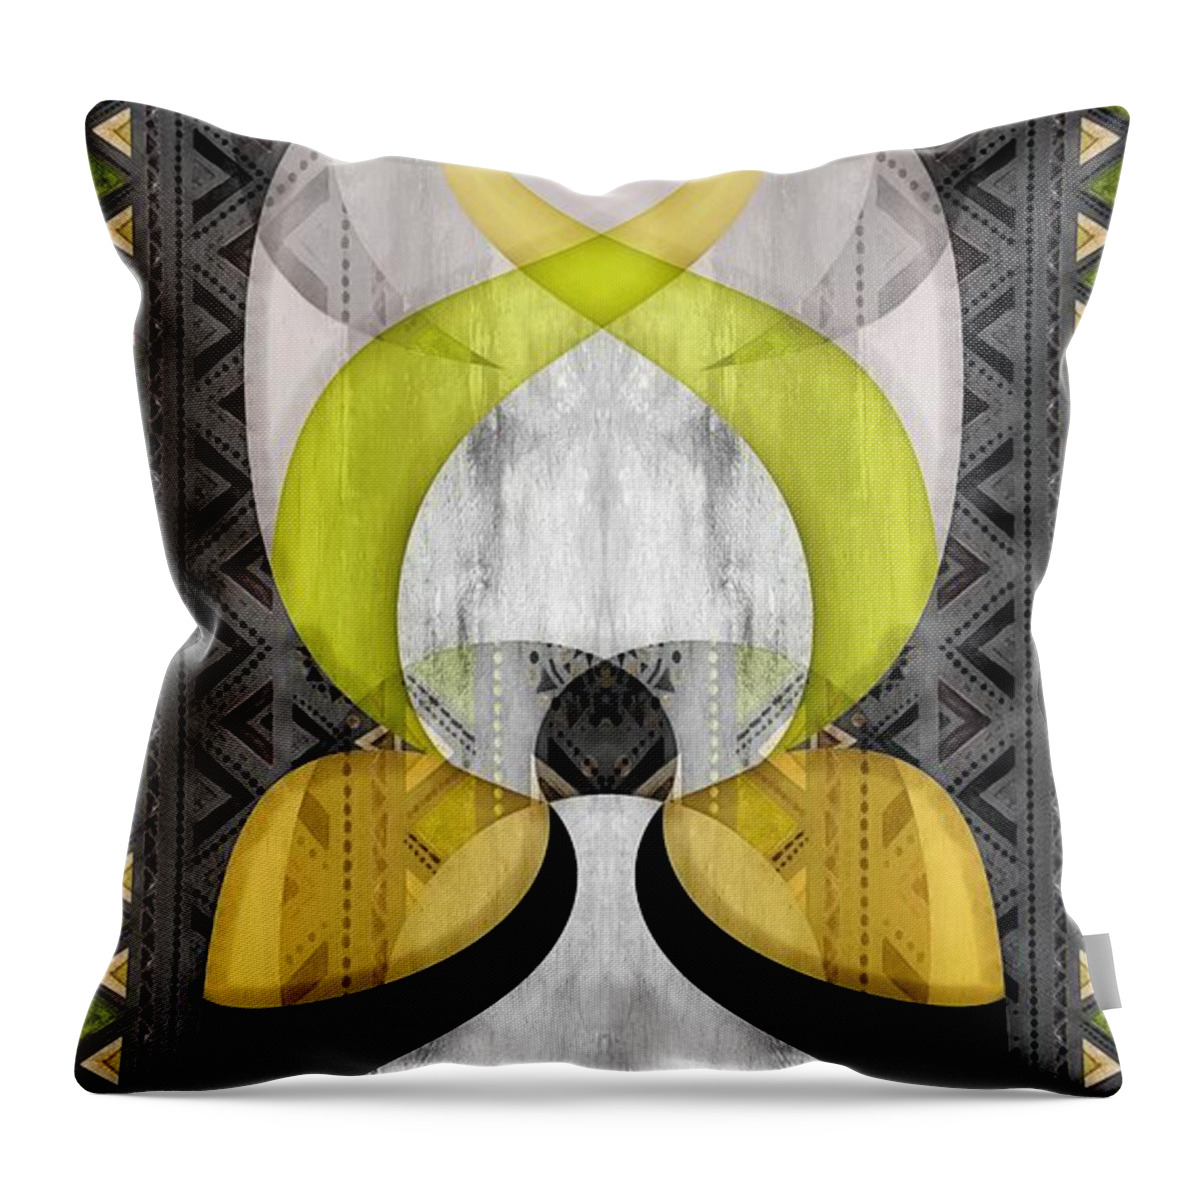 Abstract Throw Pillow featuring the digital art Not So - i65 by Variance Collections